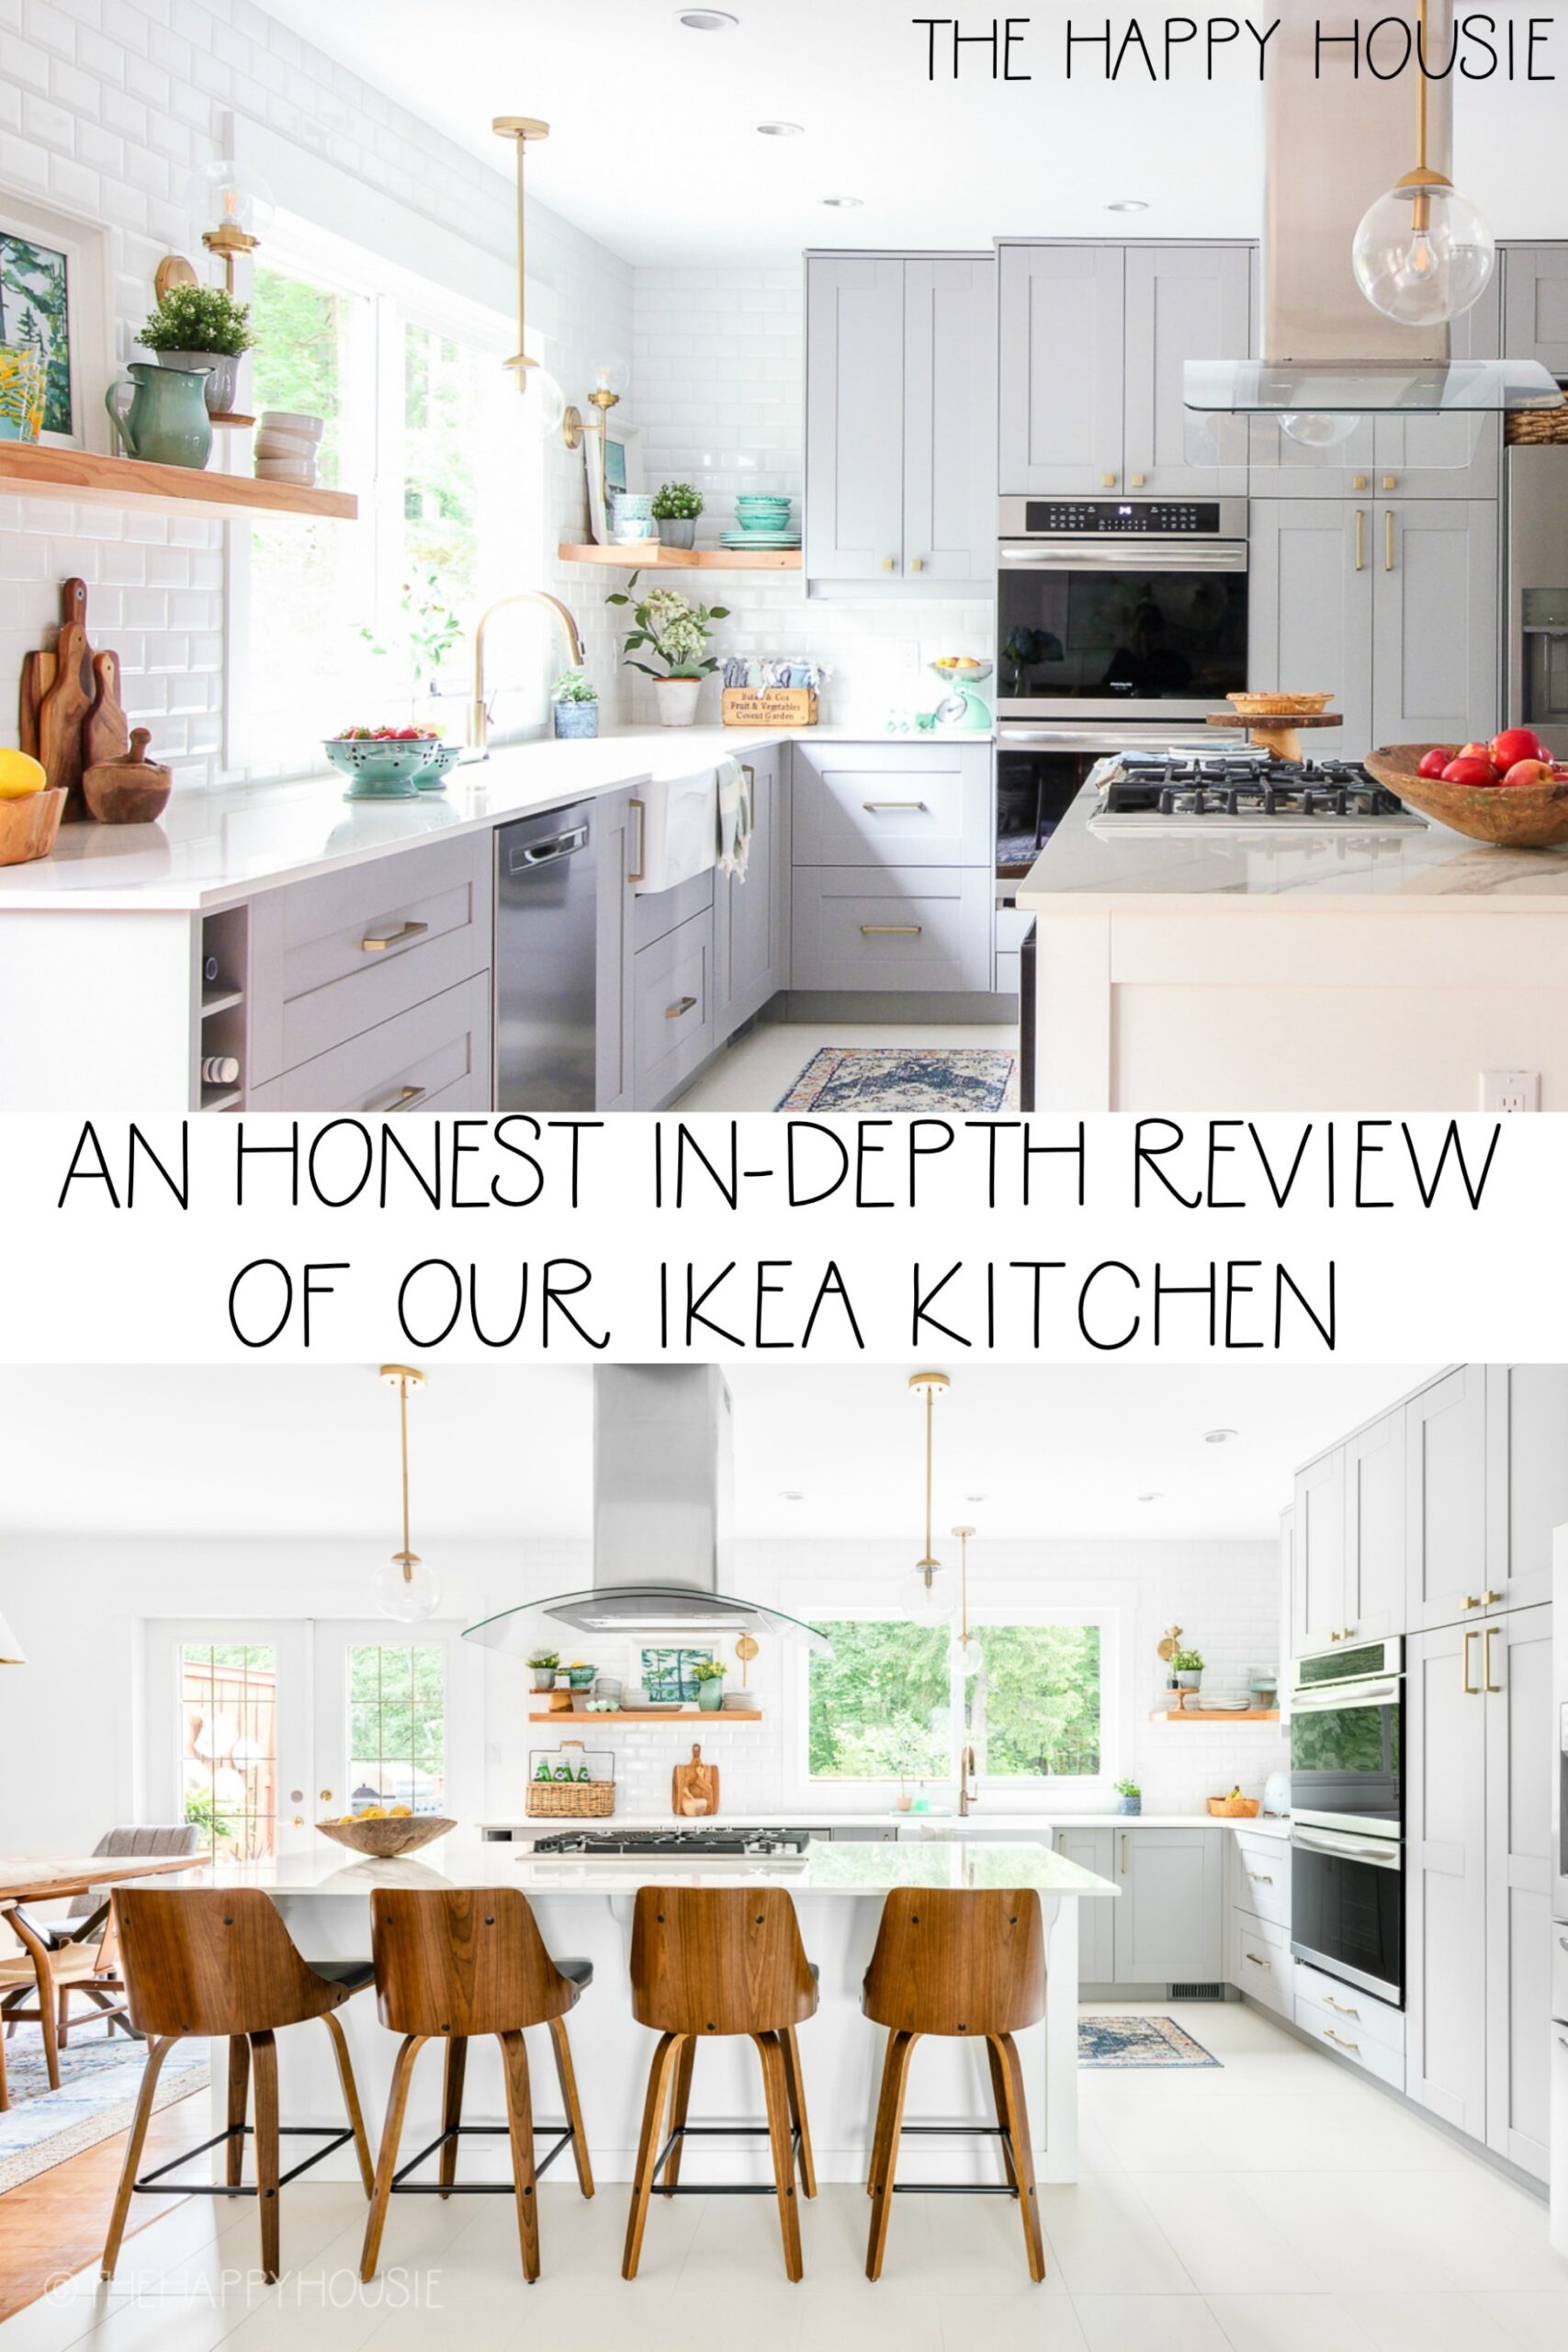 An Honest In-Depth Review of Our Ikea Kitchen  The Happy Housie - how much is an ikea kitchen?